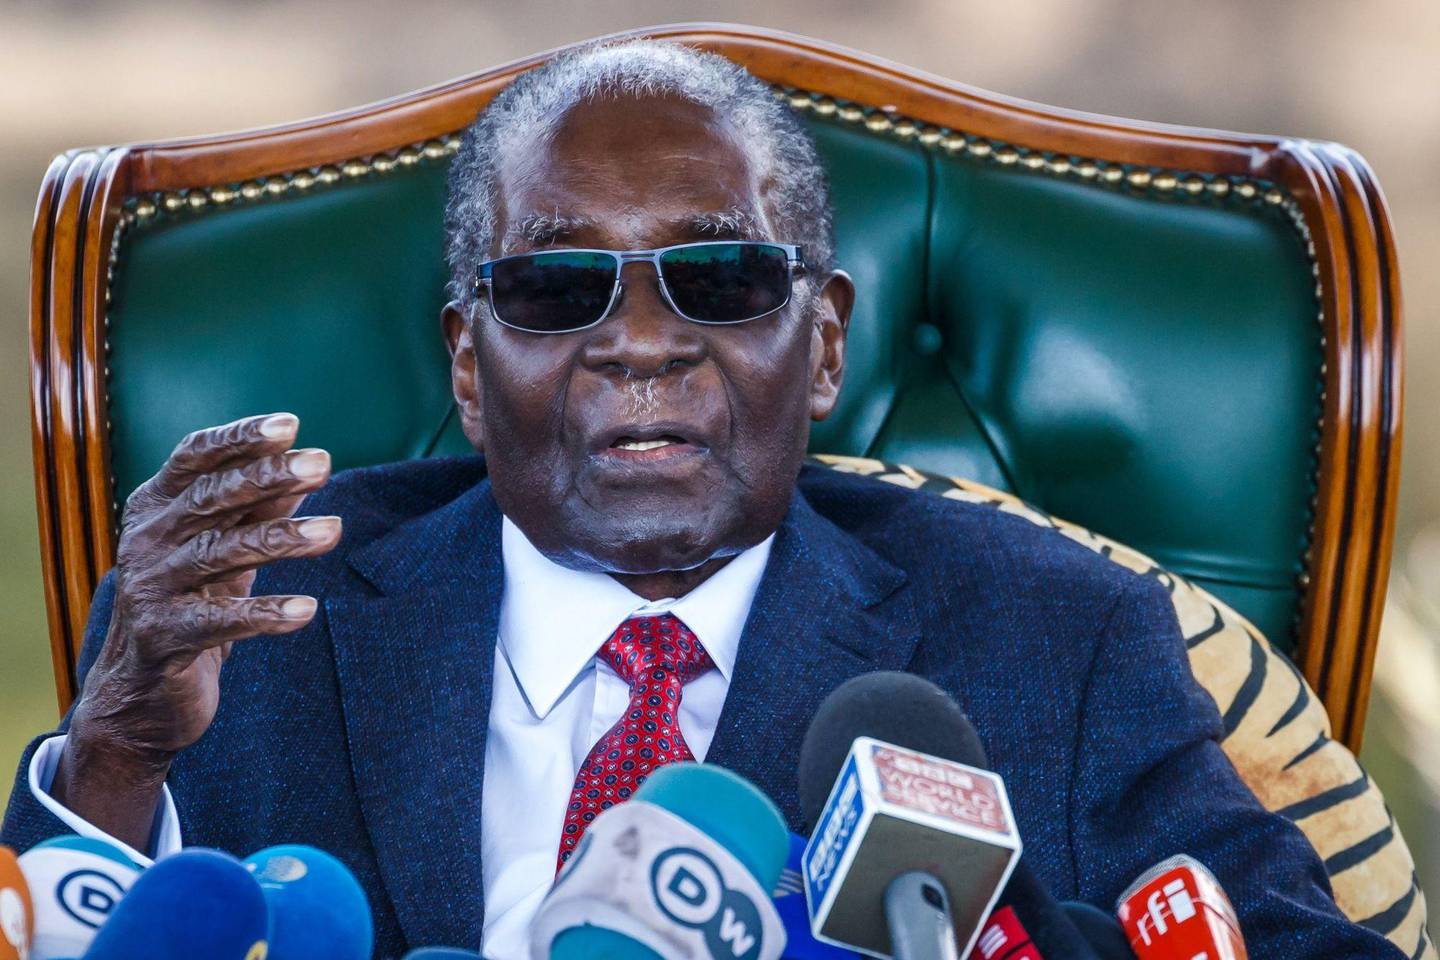 (FILES) In this file photo taken on July 29, 2018 (FILES) Zimbabwe's then President Robert Mugabe delivers a speech during a graduation ceremony at the Zimbabwe Open University in Harare, where he presides as the Chancellor. - Zimbabwe ex-president Robert Mugabe has died aged 95 according to official on September 6, 2019. (Photo by Jekesai NJIKIZANA / AFP)